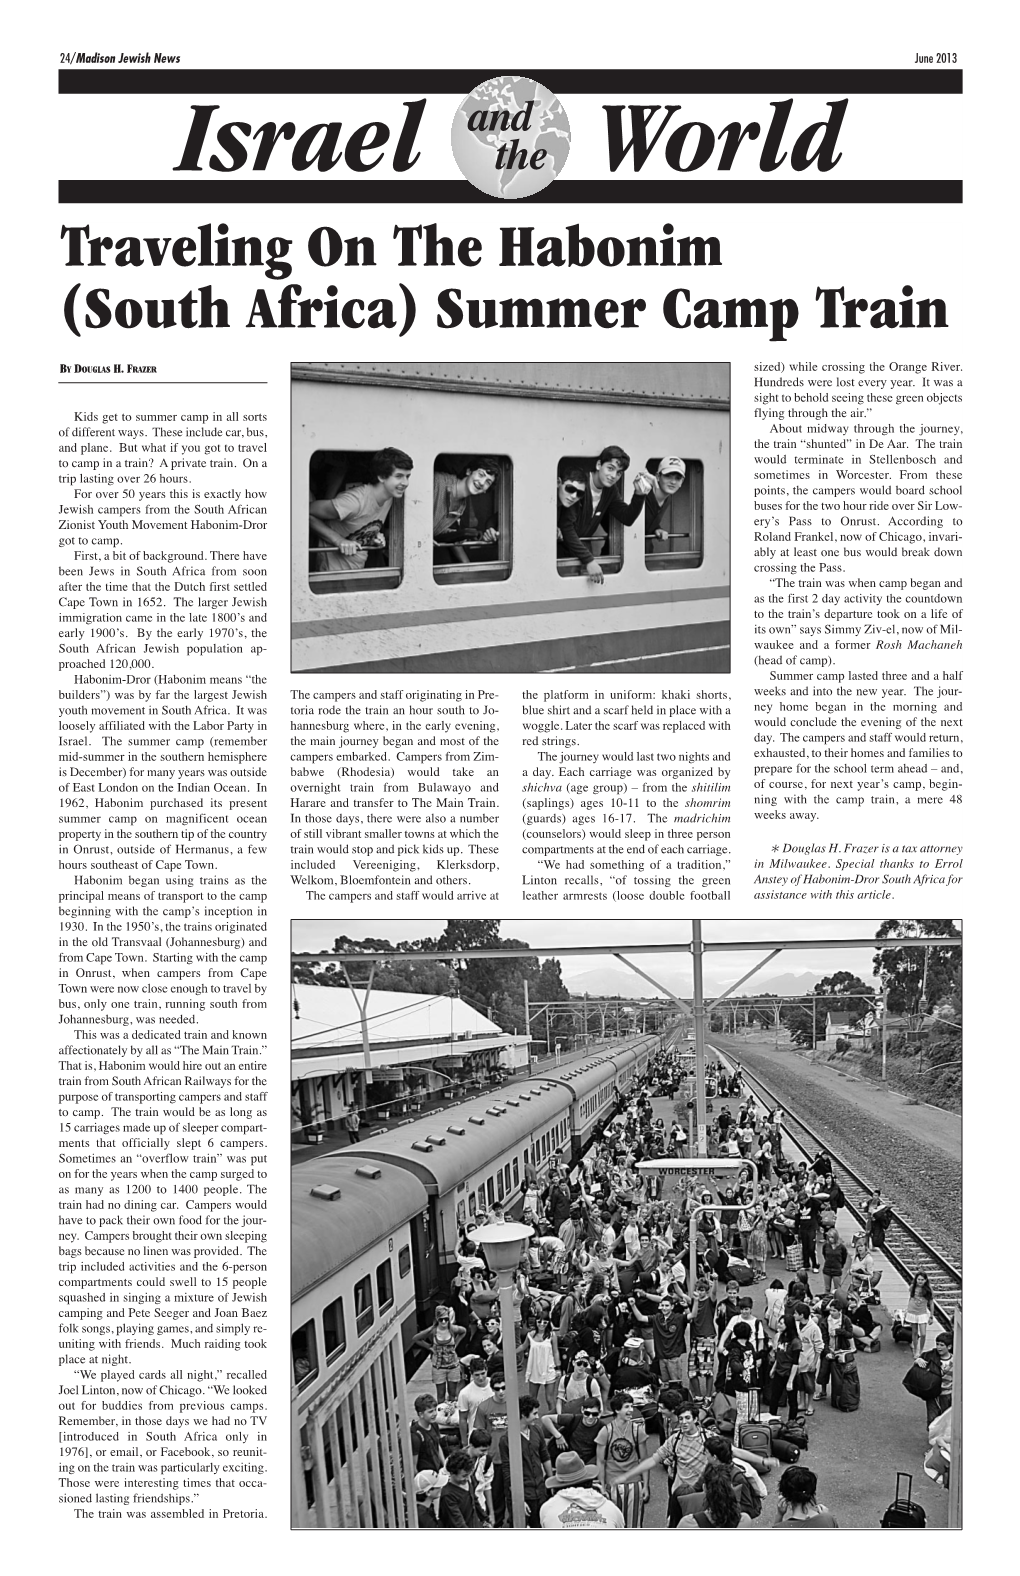 Traveling on the Habonim (South Africa) Summer Camp Train